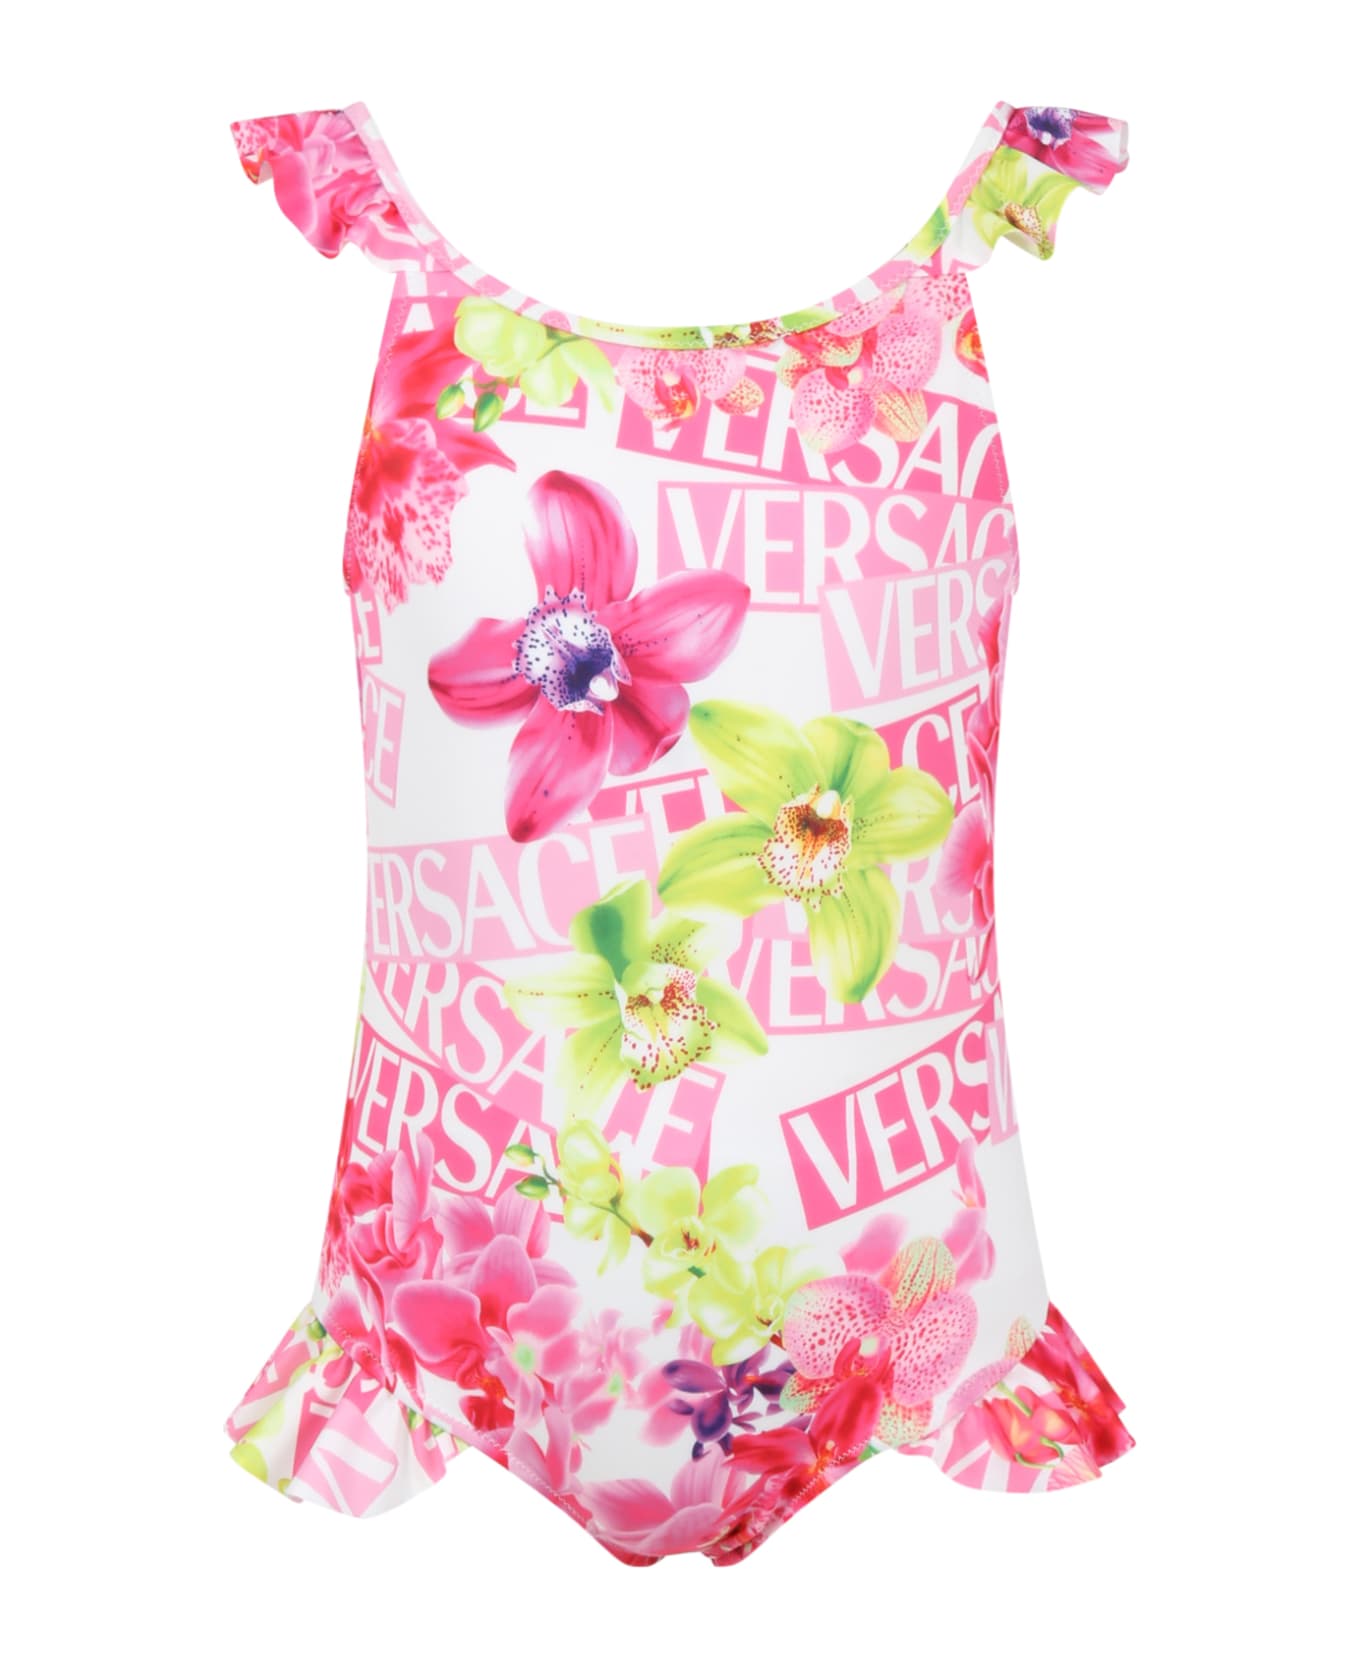 Versace White Swimsuite For Girl With Floral Print And Logo All-over - Multicolor